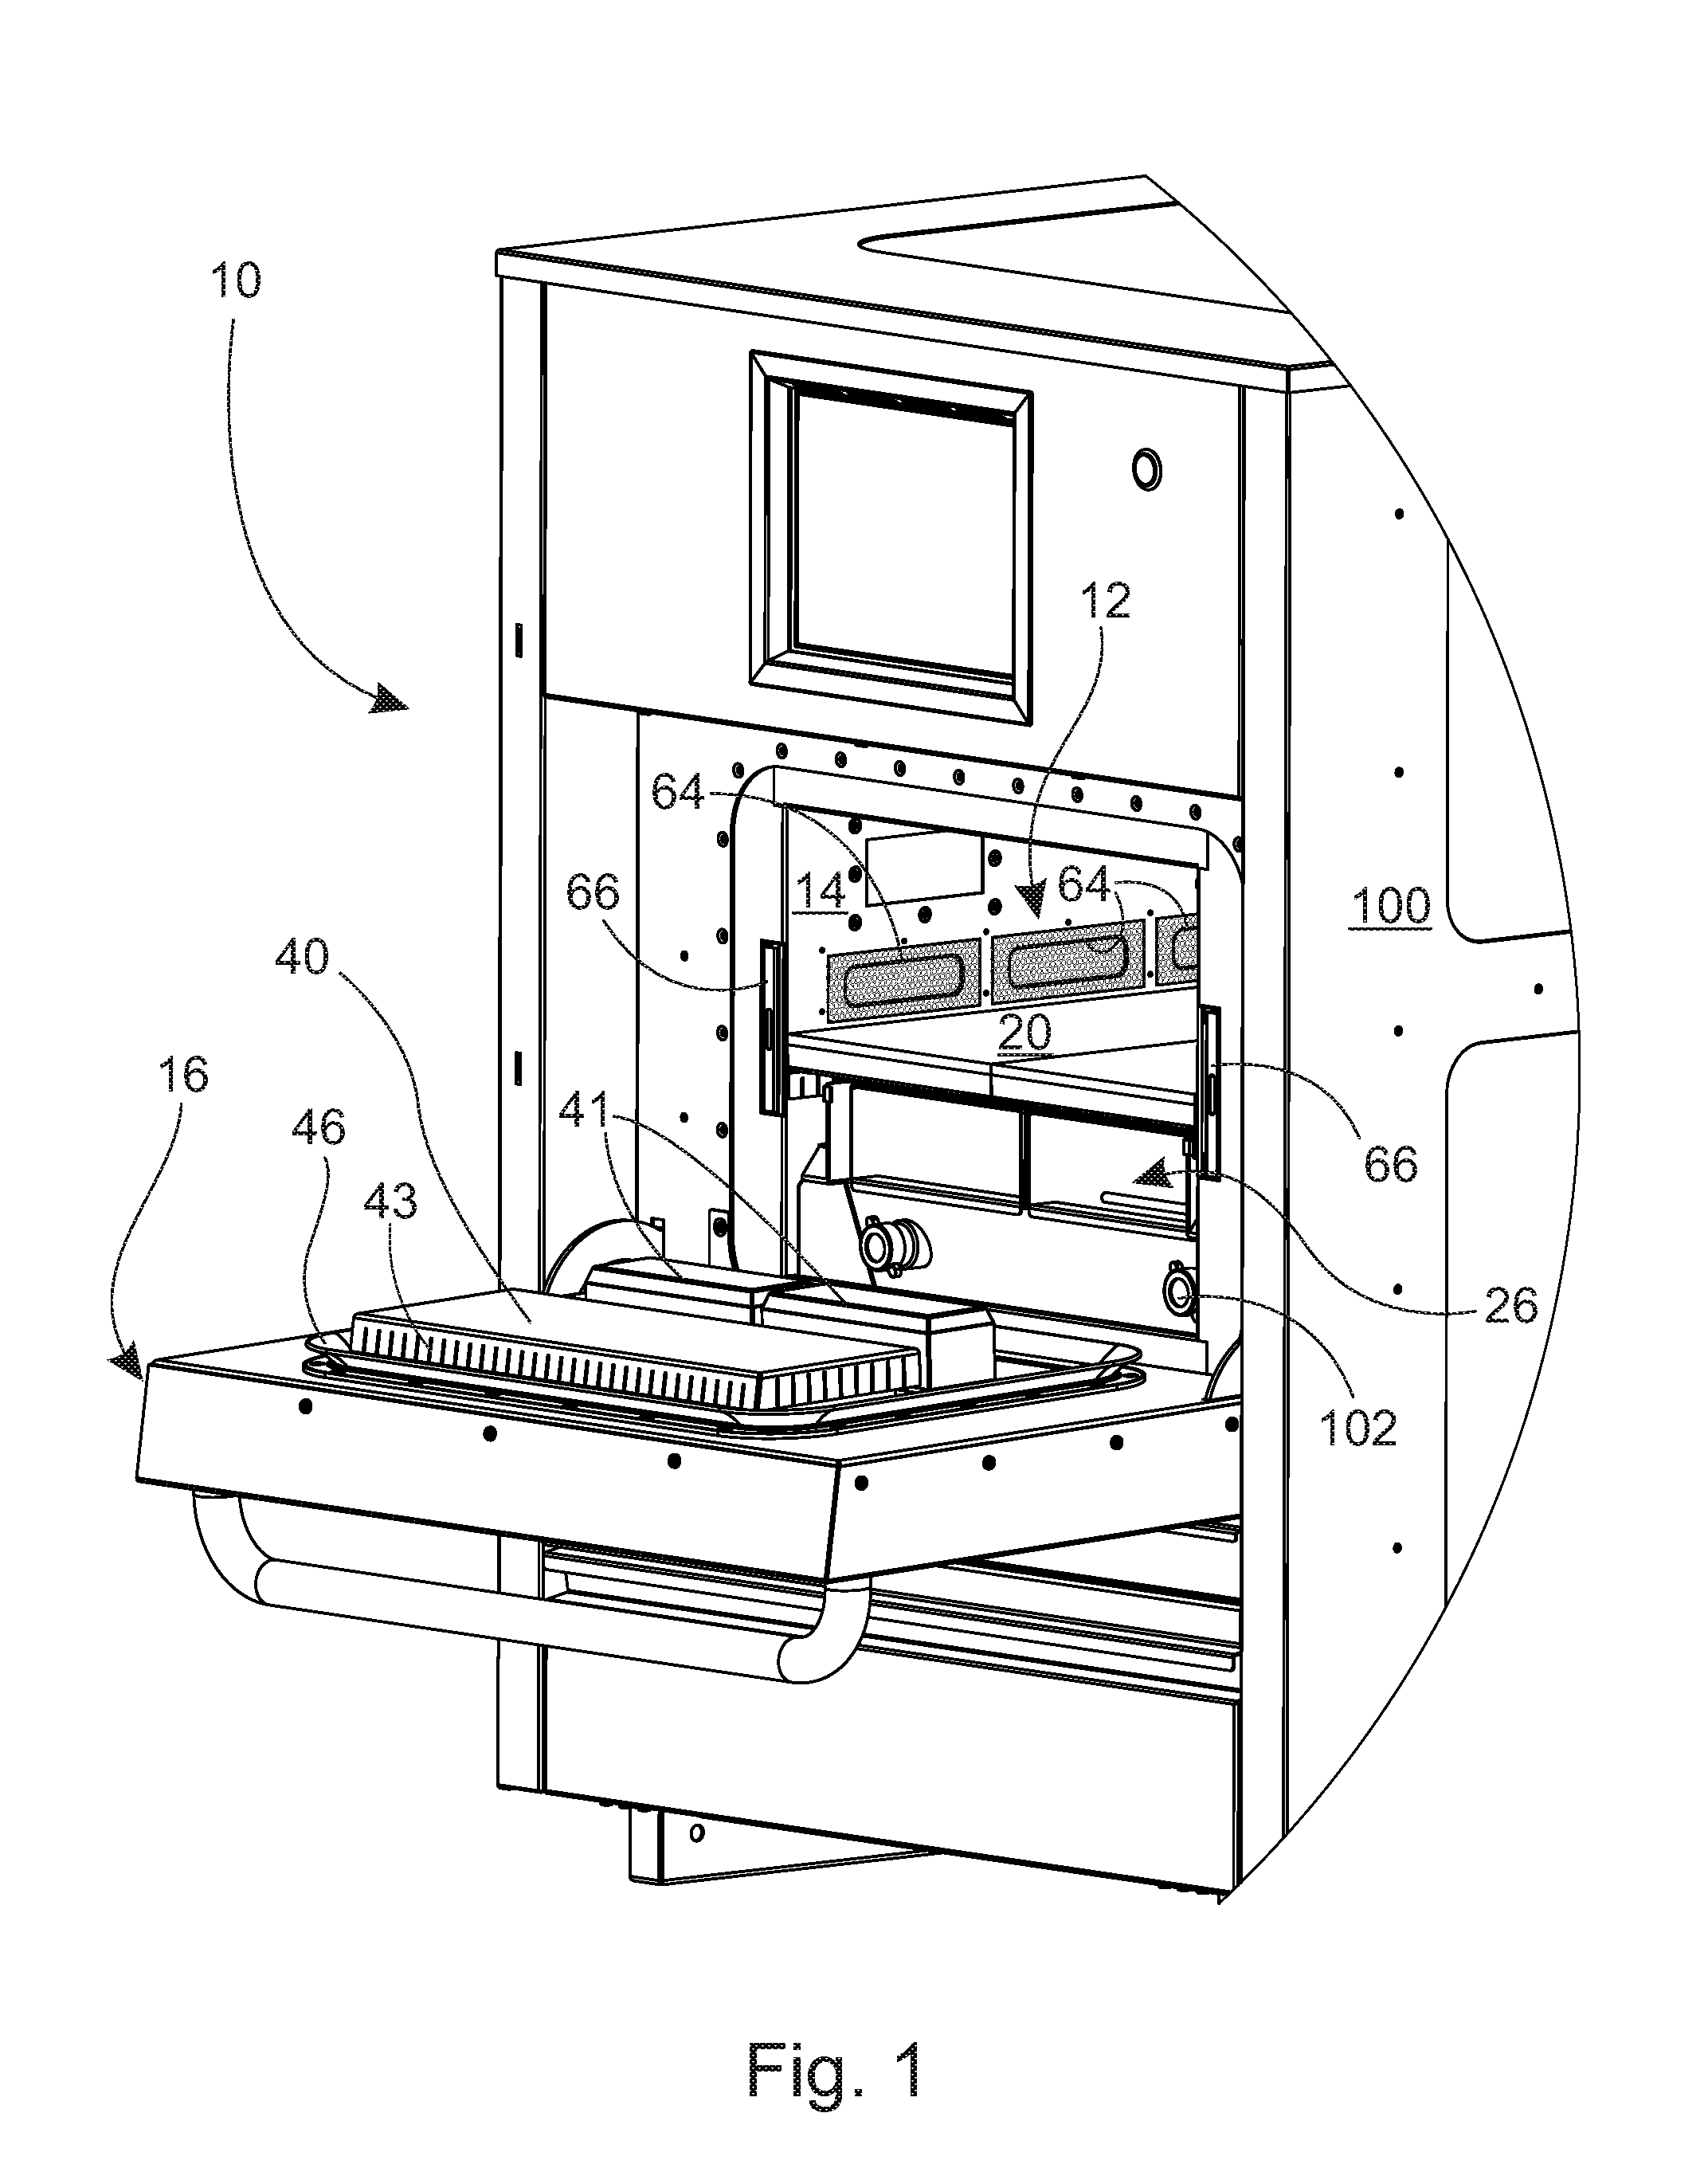 Oven for heating and frying food